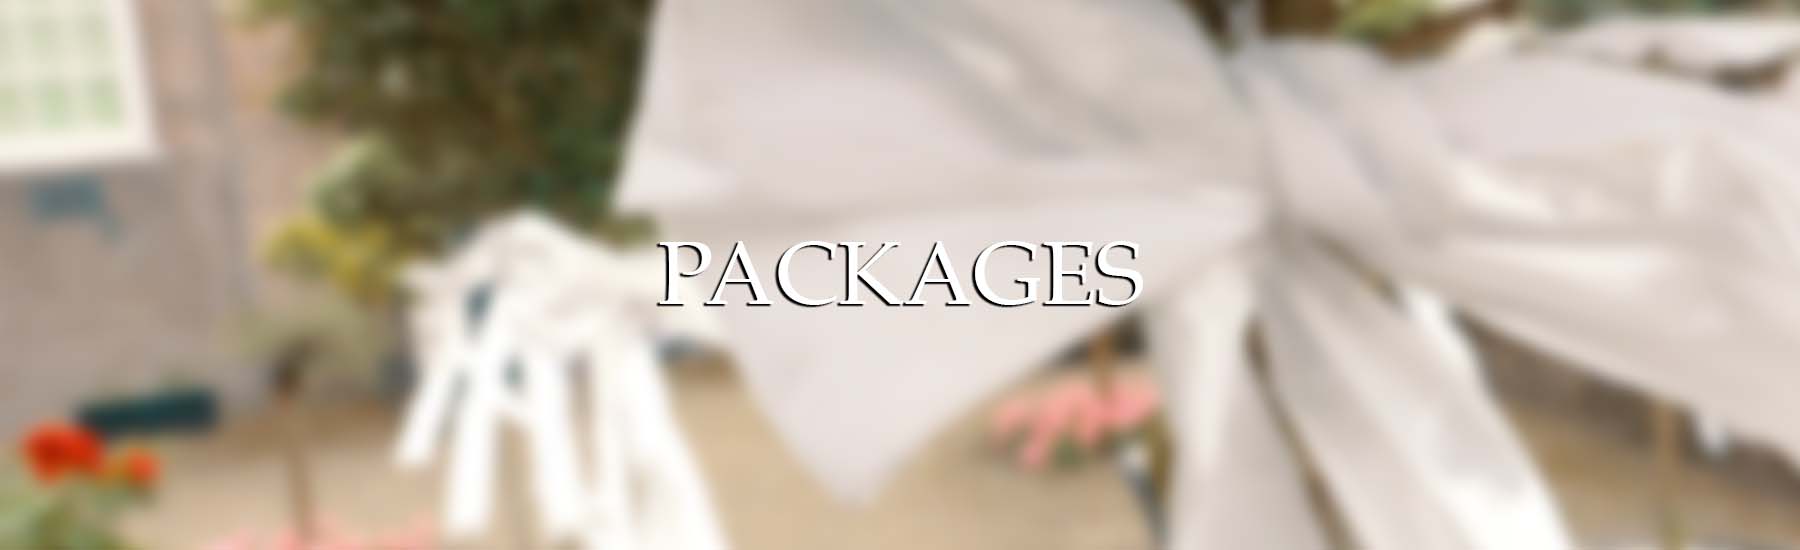 Bitmotion Wedding Packages